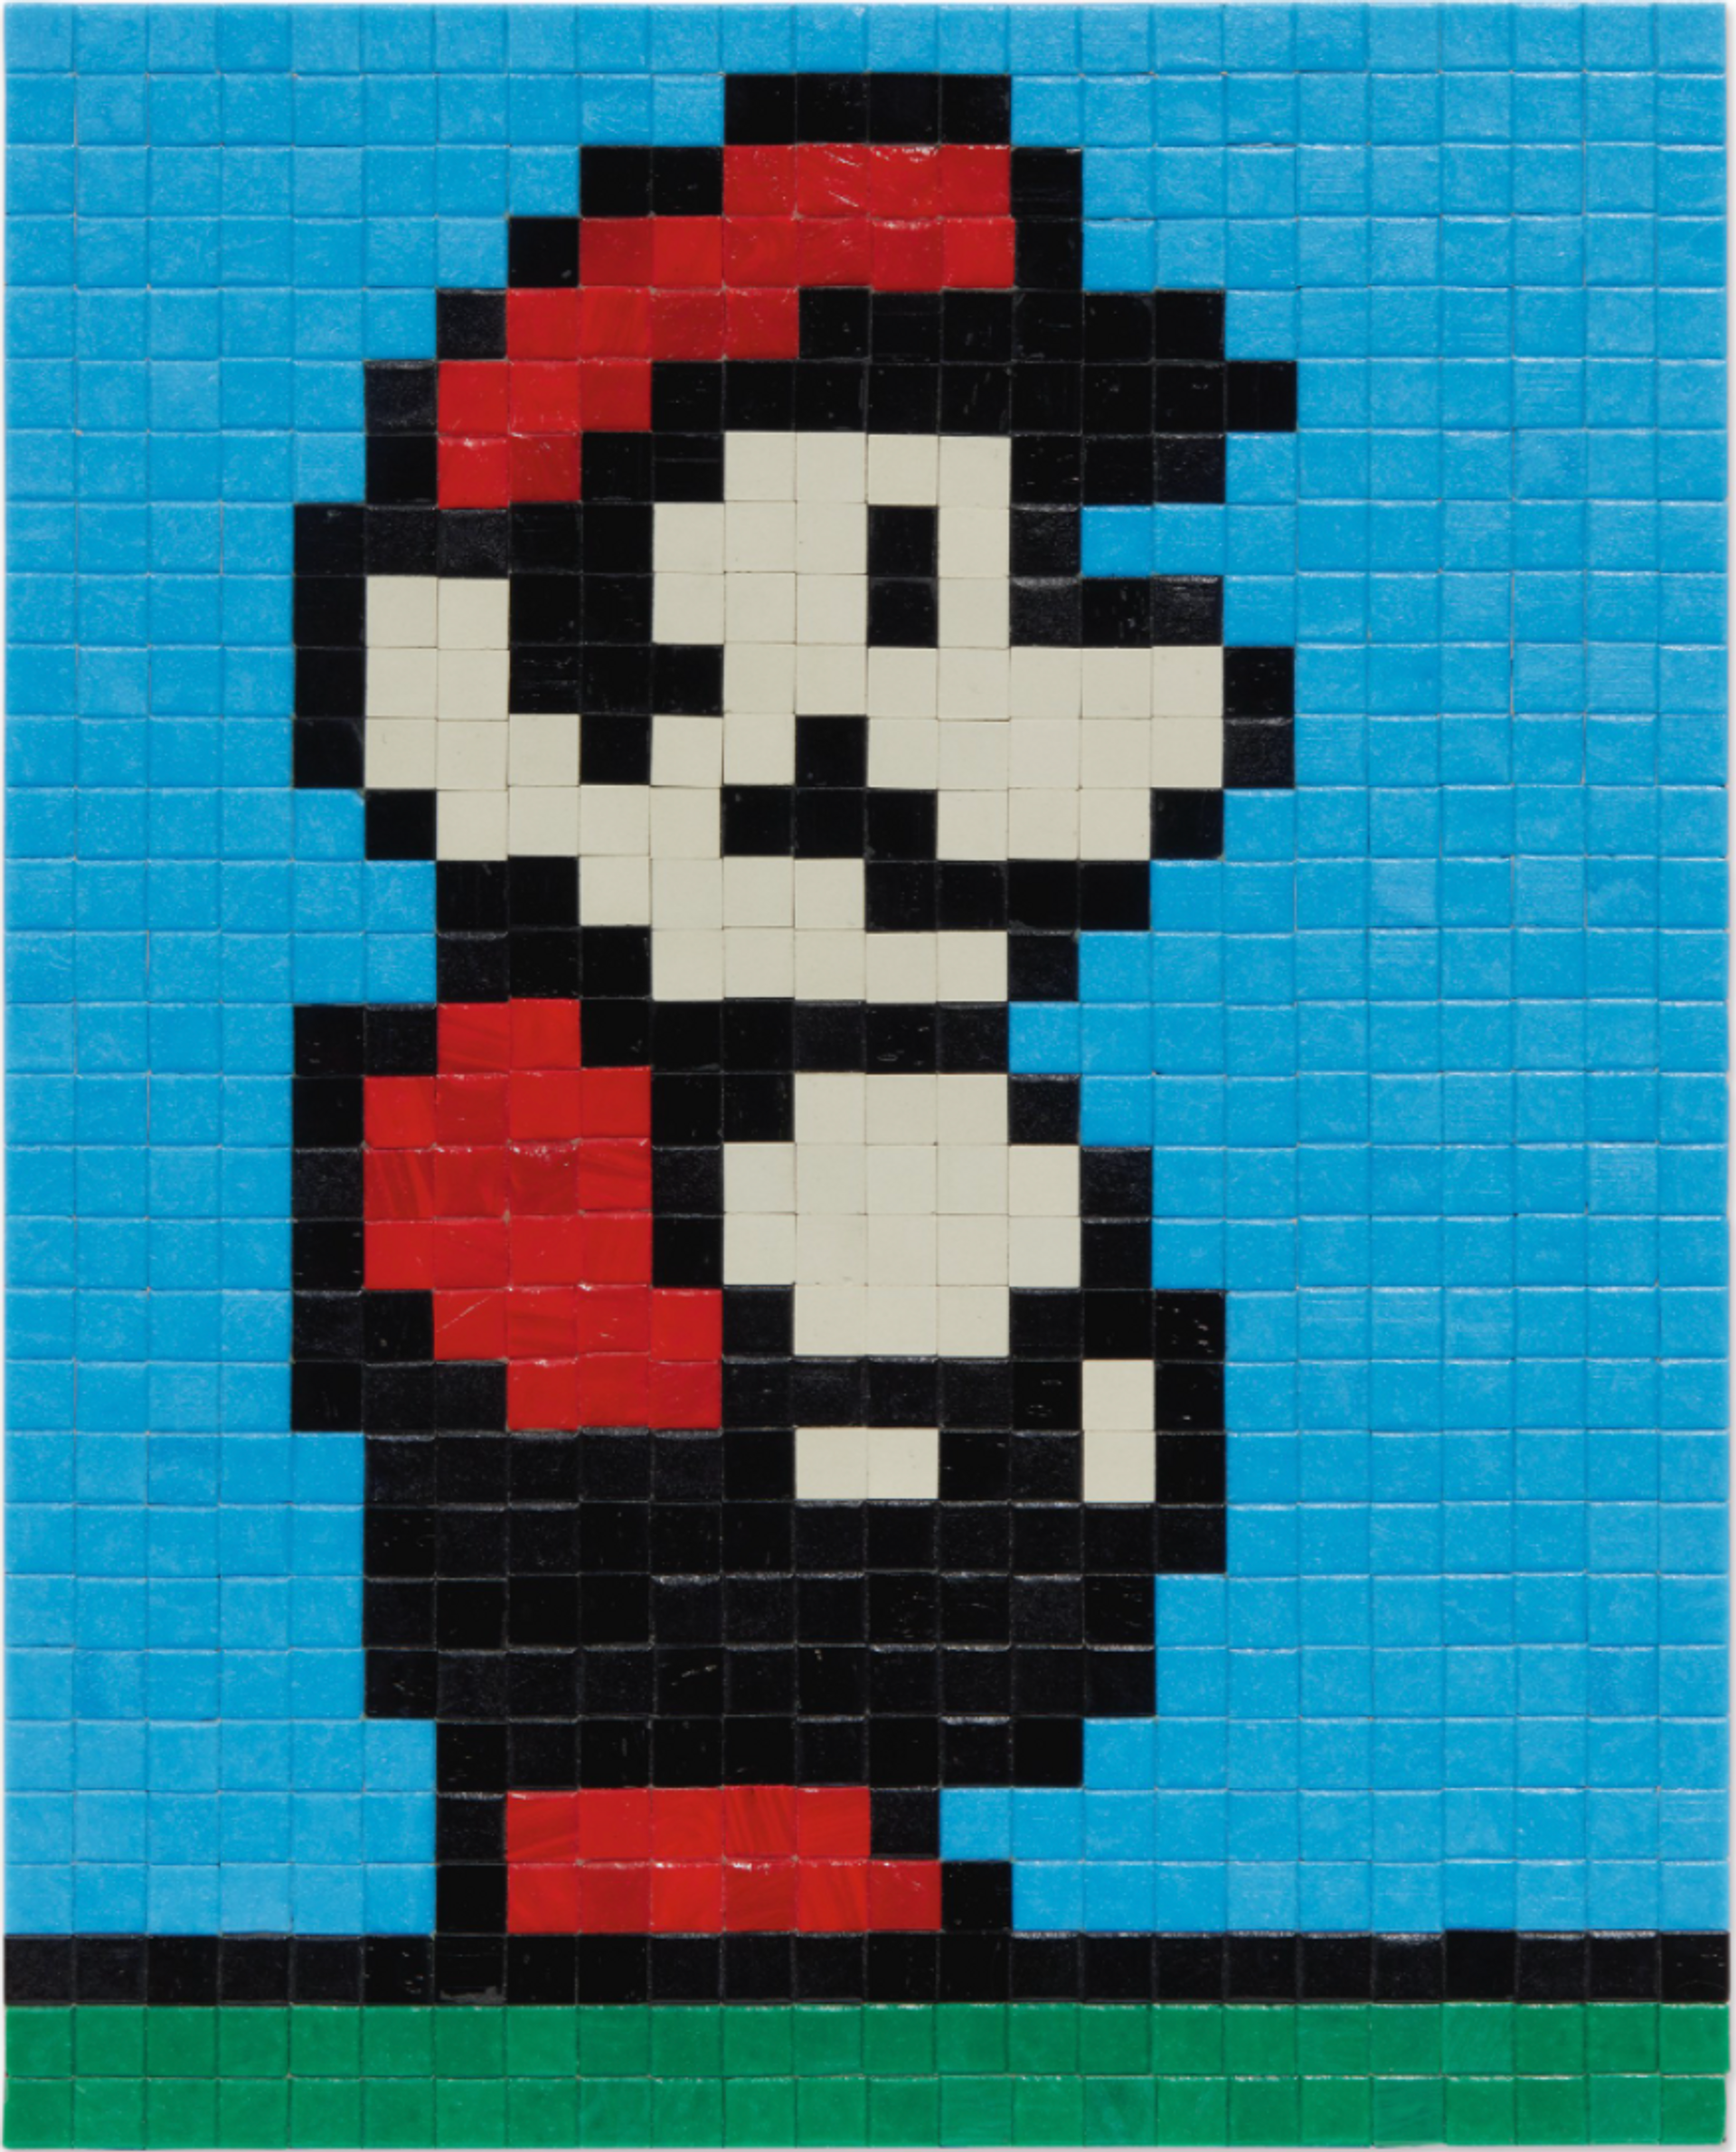 Mario by Invader 